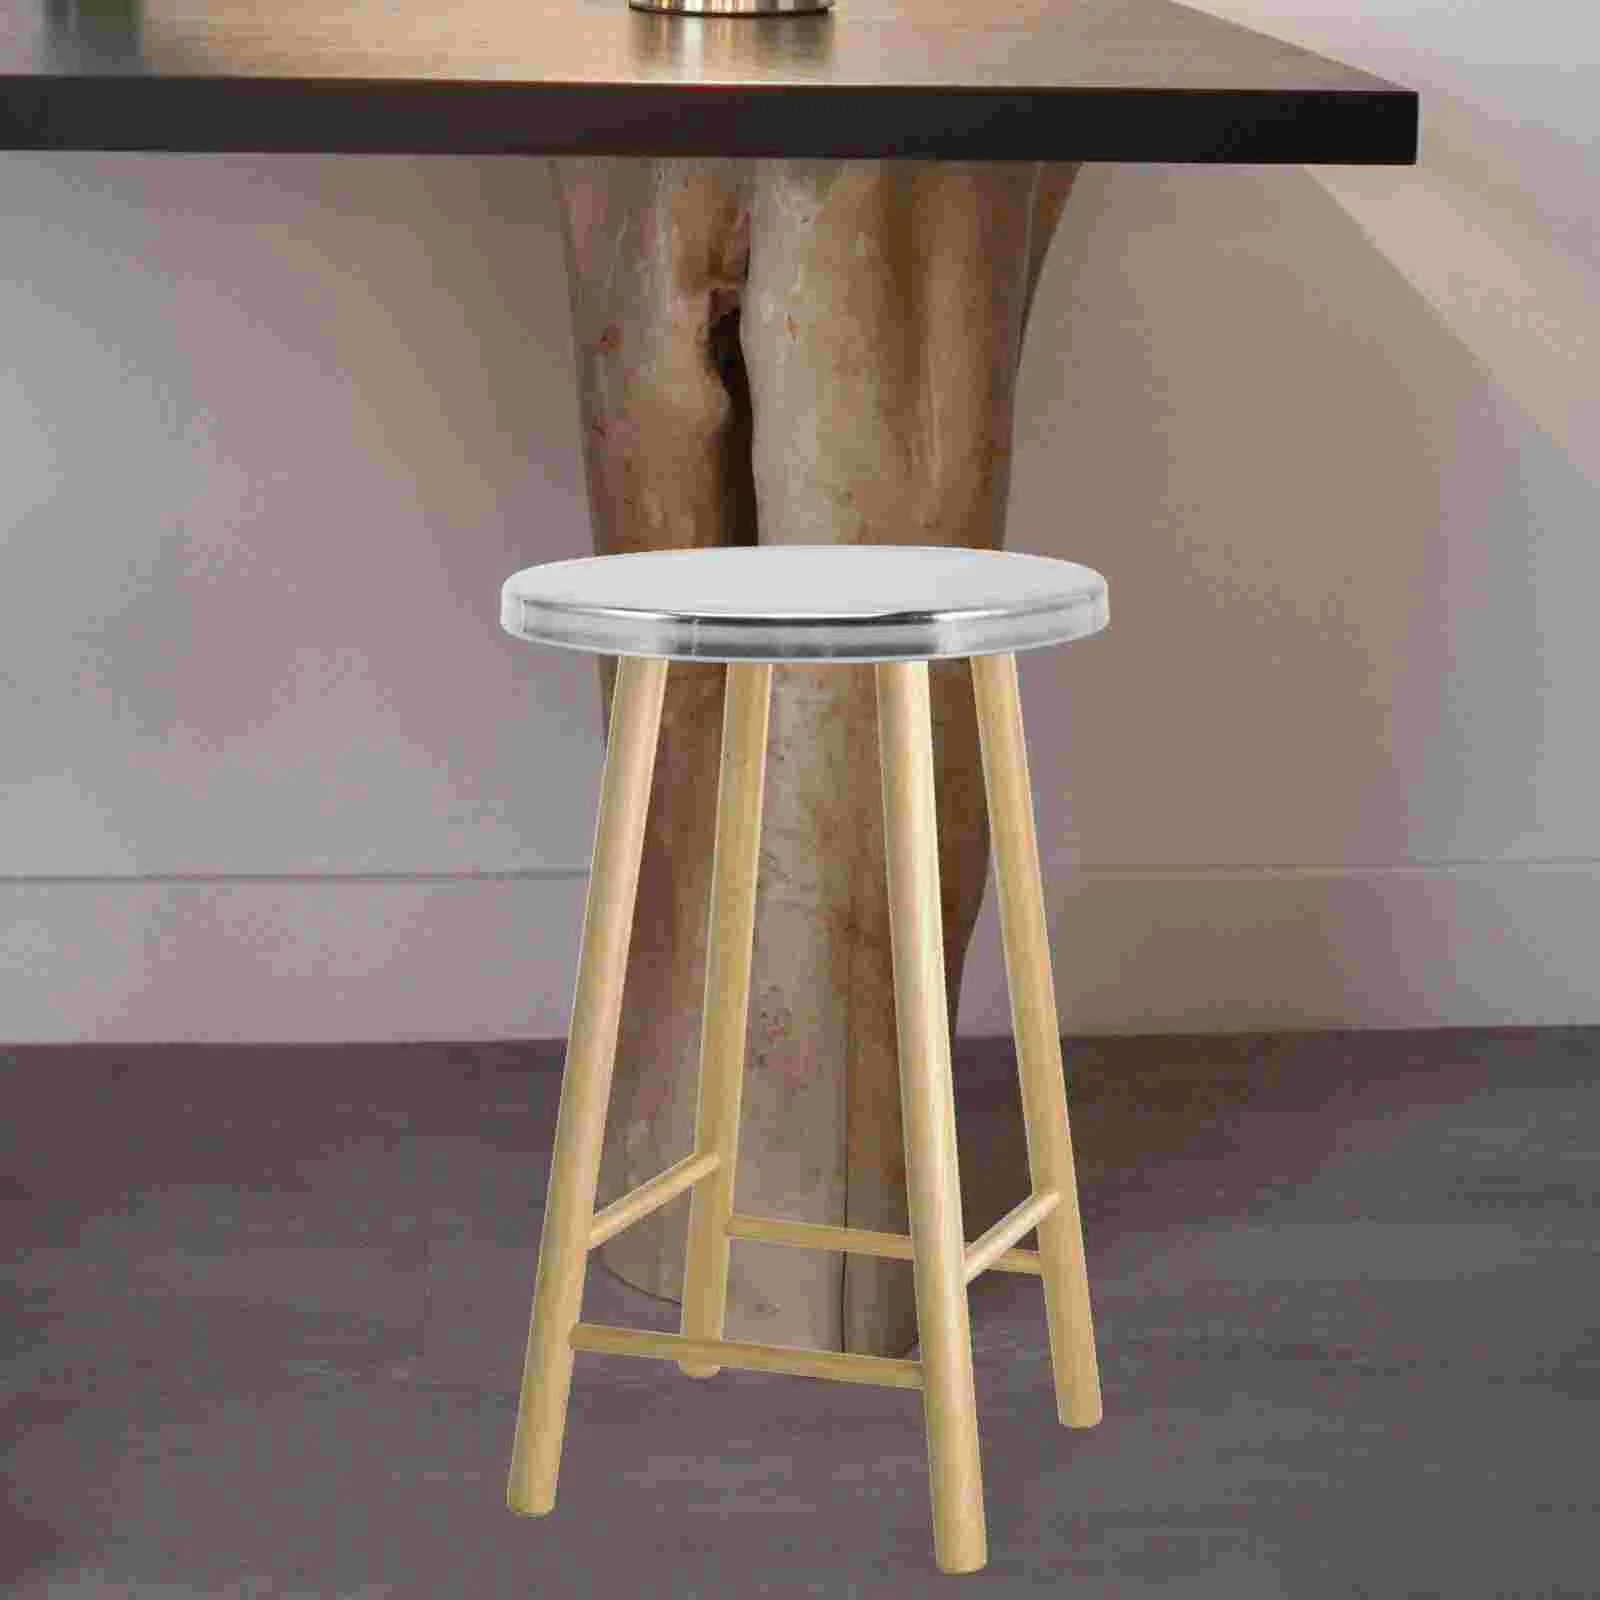 

Stool Stainless Steel Seat Bar Stool Seat Part Replacement Seating Part Revolving Chair Pad